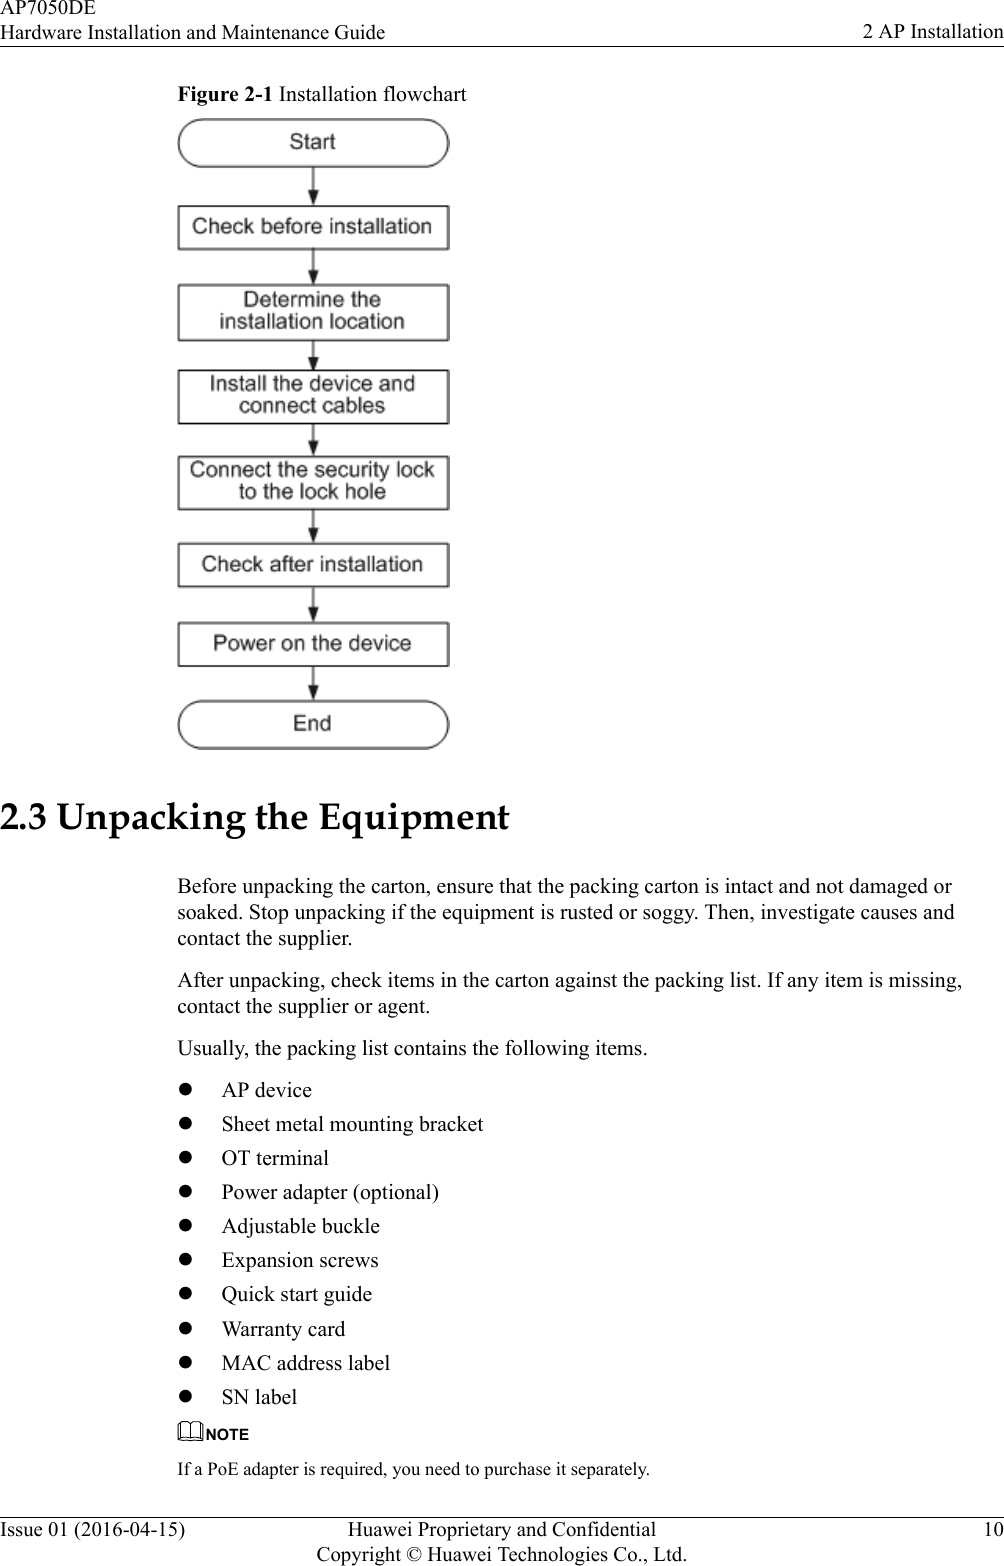 Figure 2-1 Installation flowchart2.3 Unpacking the EquipmentBefore unpacking the carton, ensure that the packing carton is intact and not damaged orsoaked. Stop unpacking if the equipment is rusted or soggy. Then, investigate causes andcontact the supplier.After unpacking, check items in the carton against the packing list. If any item is missing,contact the supplier or agent.Usually, the packing list contains the following items.lAP devicelSheet metal mounting bracketlOT terminallPower adapter (optional)lAdjustable bucklelExpansion screwslQuick start guidelWarranty cardlMAC address labellSN labelNOTEIf a PoE adapter is required, you need to purchase it separately.AP7050DEHardware Installation and Maintenance Guide 2 AP InstallationIssue 01 (2016-04-15) Huawei Proprietary and ConfidentialCopyright © Huawei Technologies Co., Ltd.10